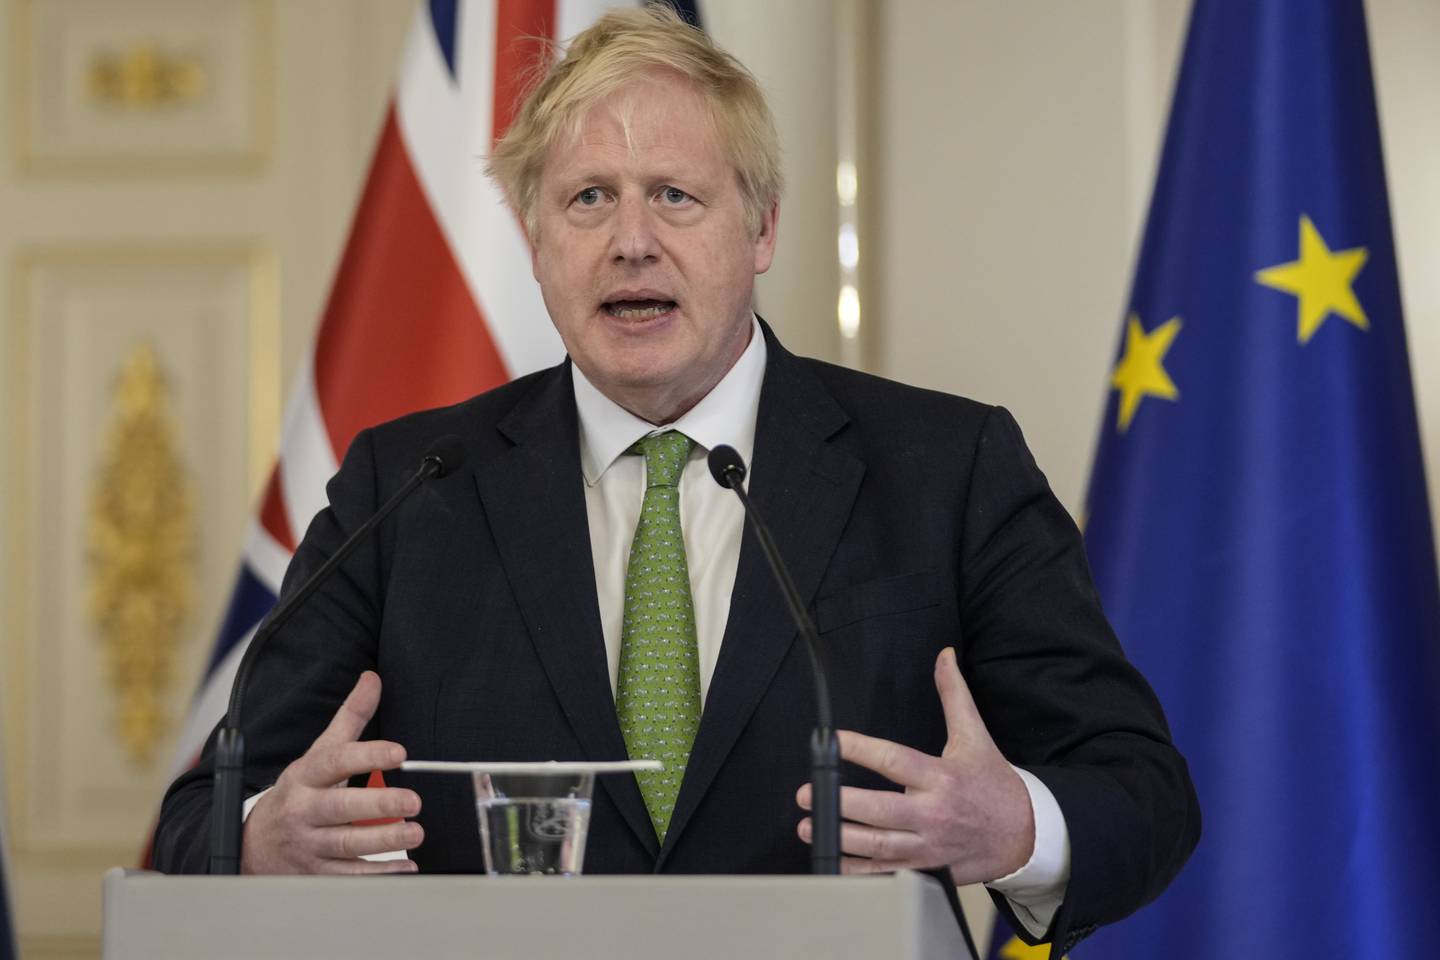 British Prime Minister Boris Johnson has hinted that his government might consider scrapping elements of the Northern Ireland protocol. EPA.